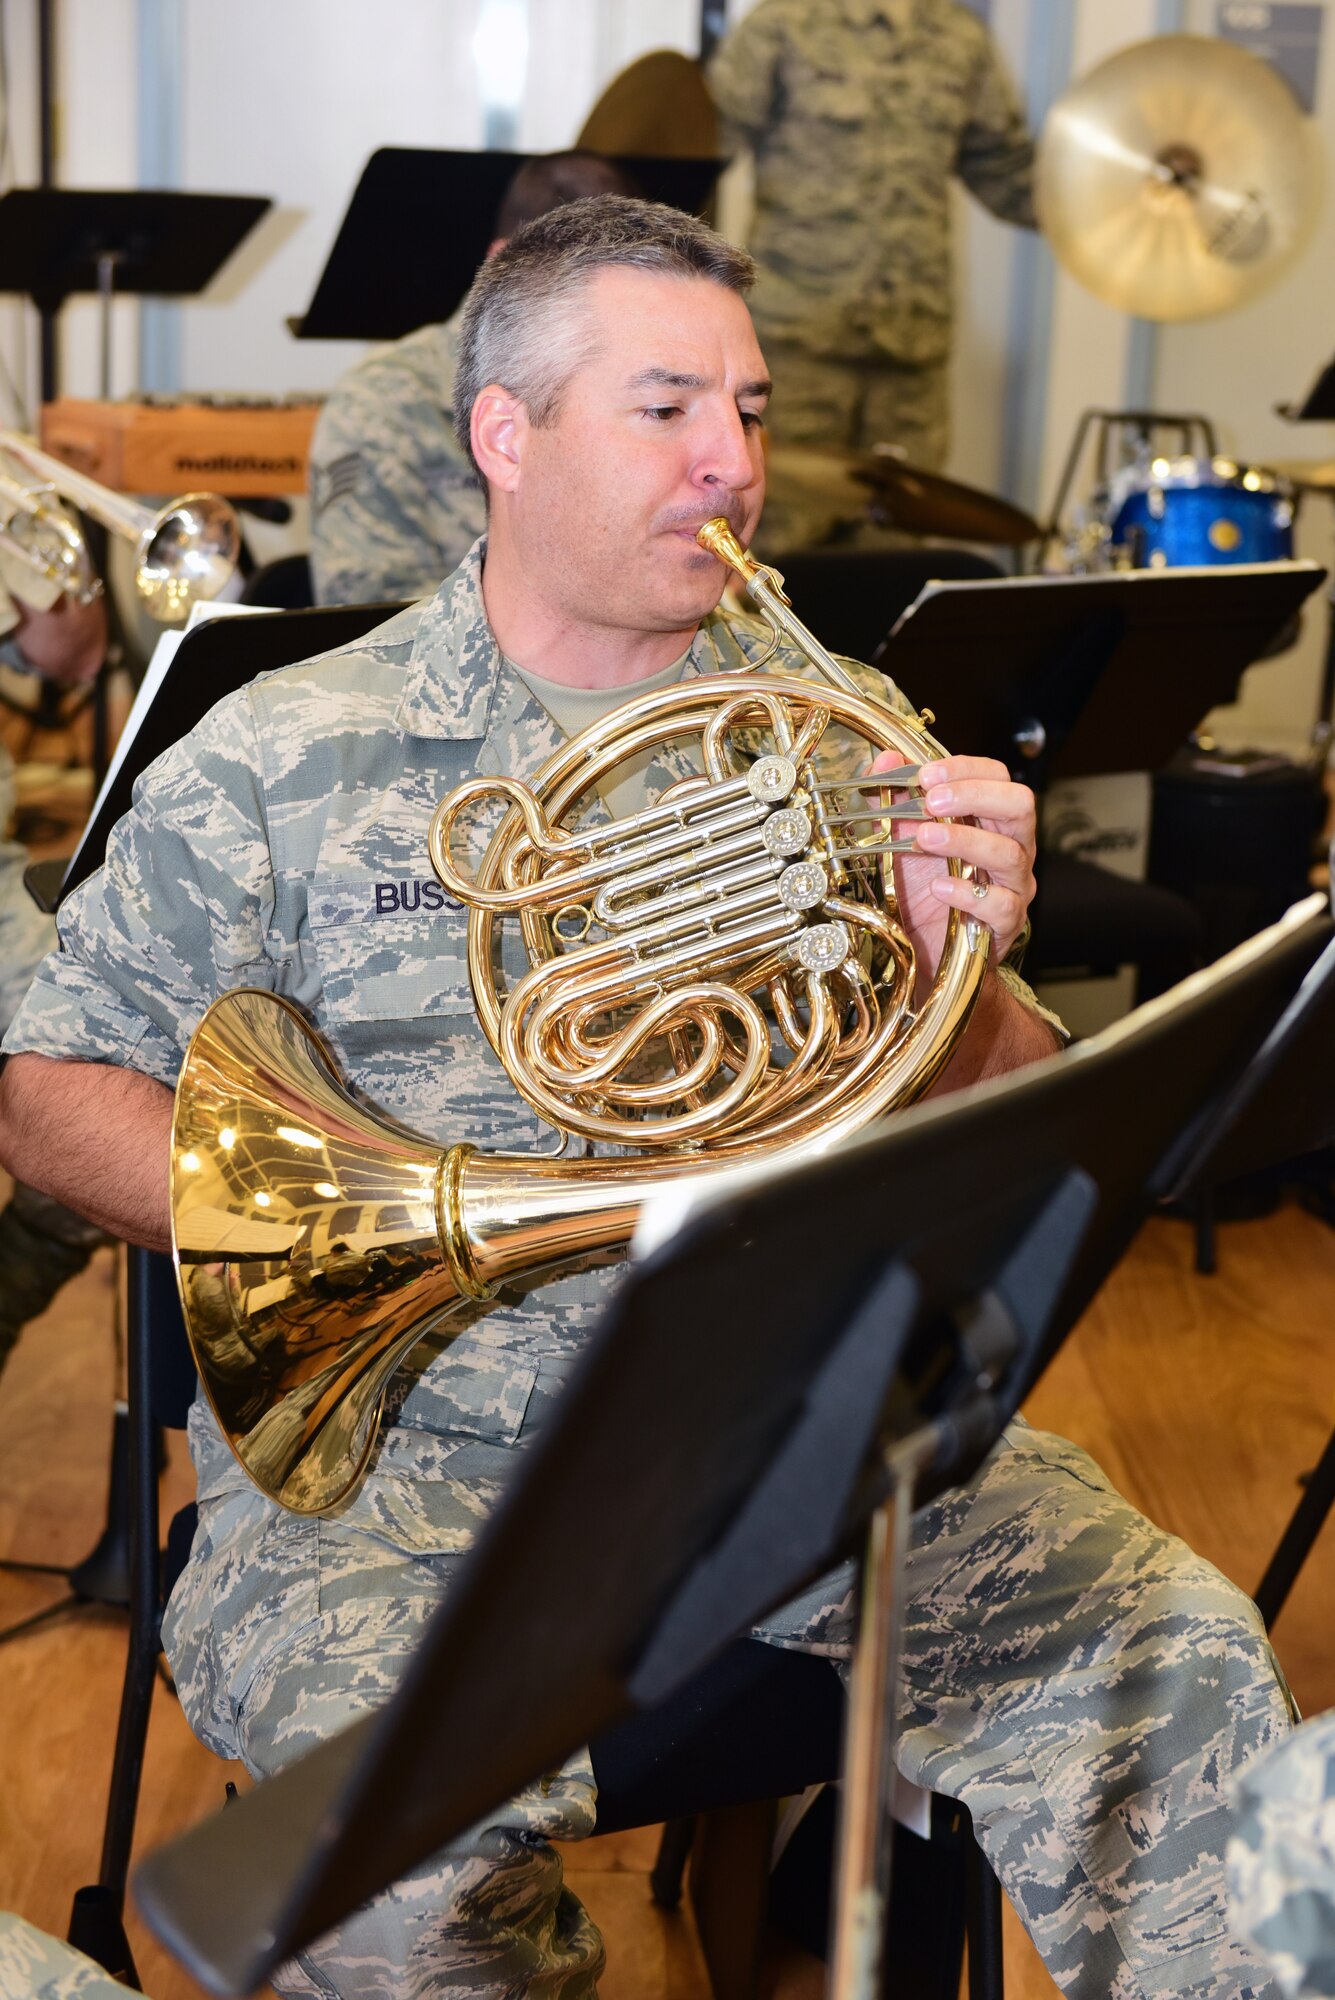 Master Sgt. Jeremy Buss, a french horn player with the Air National Guard Band of the Northeast, rehearses Nov. 17, 2018, for the band’s upcoming annual holiday concert. The concert is scheduled for Dec. 16 at the Auditorium of the Scottish Rite Cathedral, Harrisburg, Pennsylvania, at 3 p.m. and will feature the 35-piece wind-ensemble Concert Band performing several winter and holiday-themed songs. The concert is free and open to the public. (U.S. Air National Guard photo by Tech. Sgt. Claire Behney/Released)